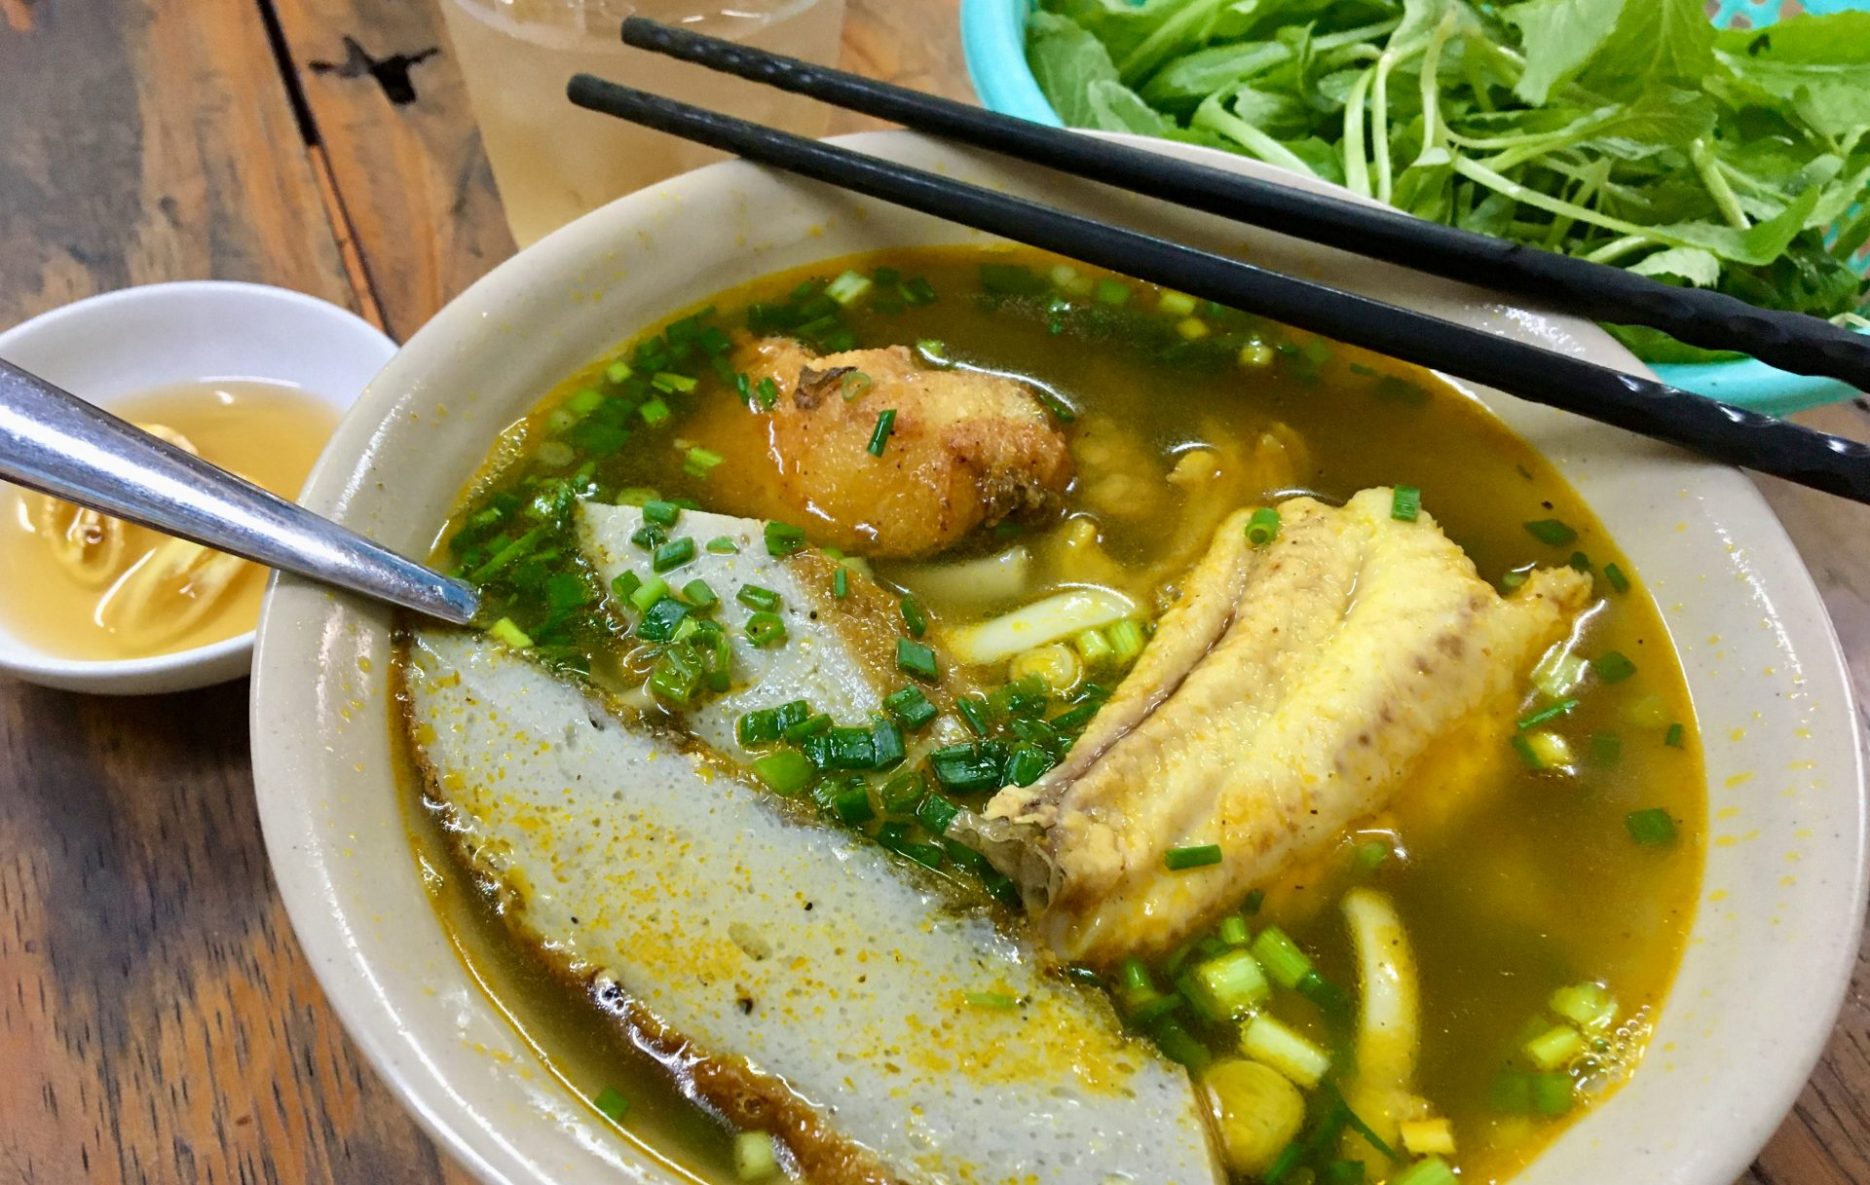 Bánh Canh Chả Cá Hấp and Chiên - Thick Rice Noodle Soup with Steamed and Fried Fish + Fish Cake